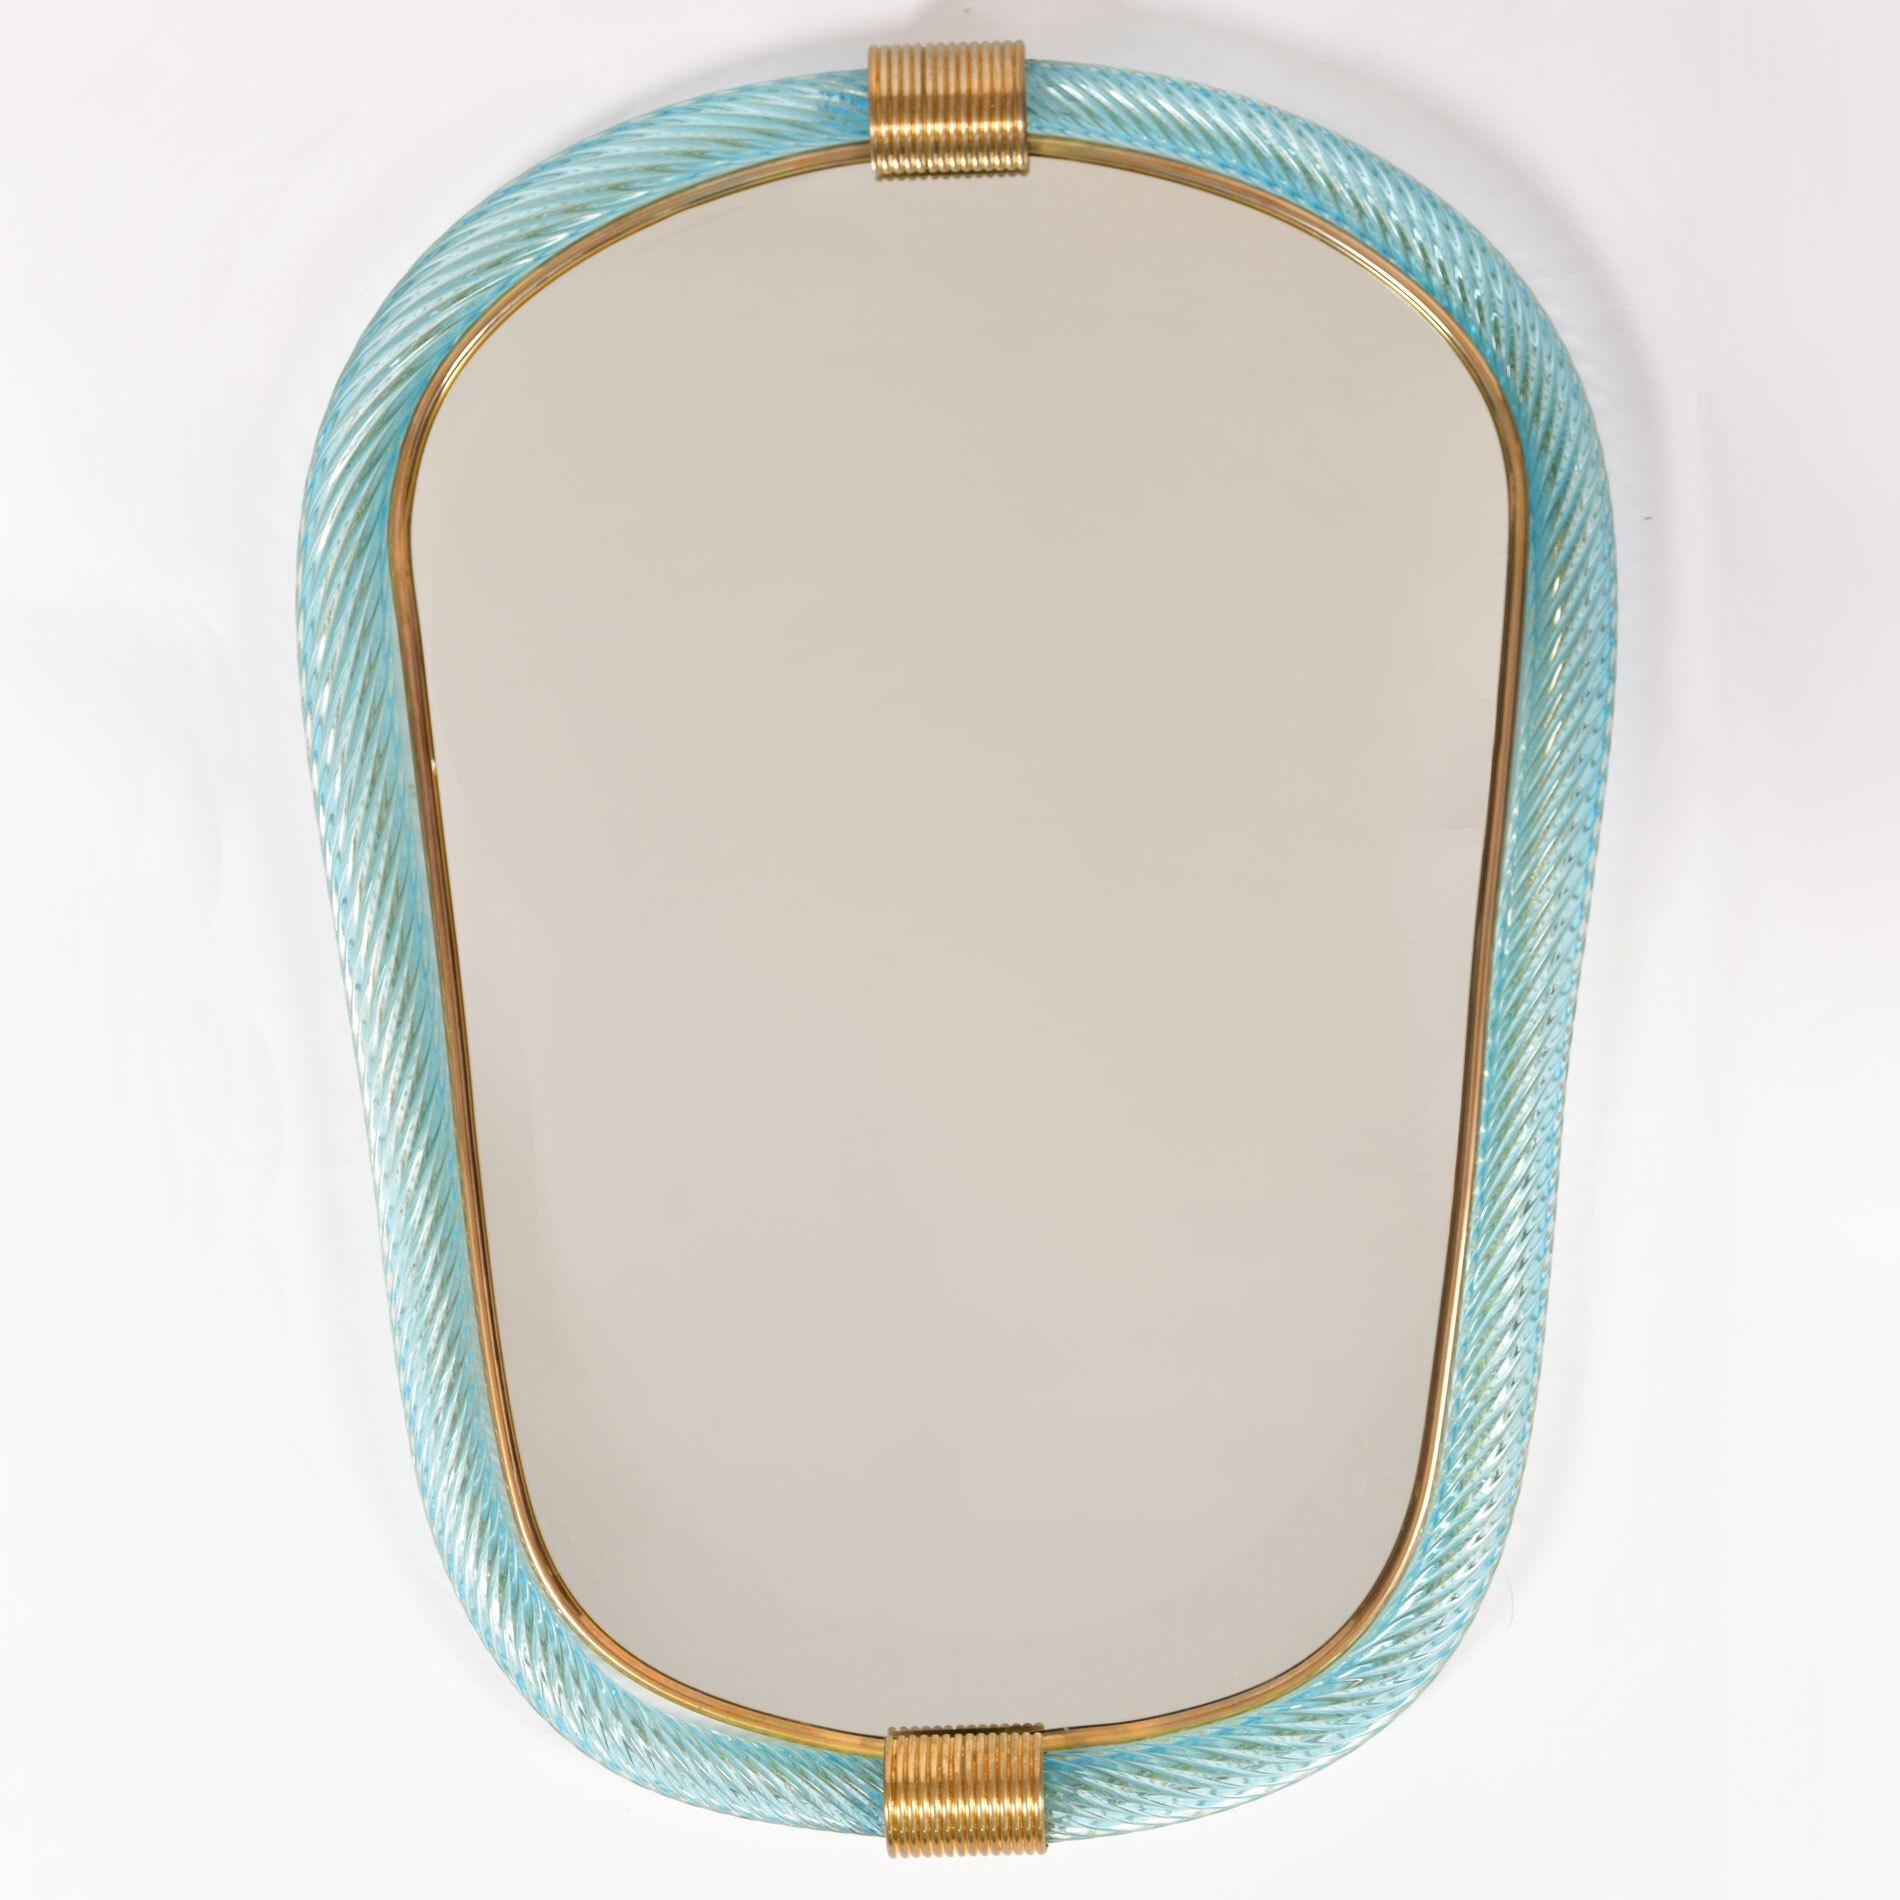 Pair of Pale green/blue ribbed hand blown Murano glass eliptical mirror with two brass fluted clasps at the top and bottom, the inner edge lined with slender brass filet.

Also available in palest pink.

8-9 week lead-time if not in stock.